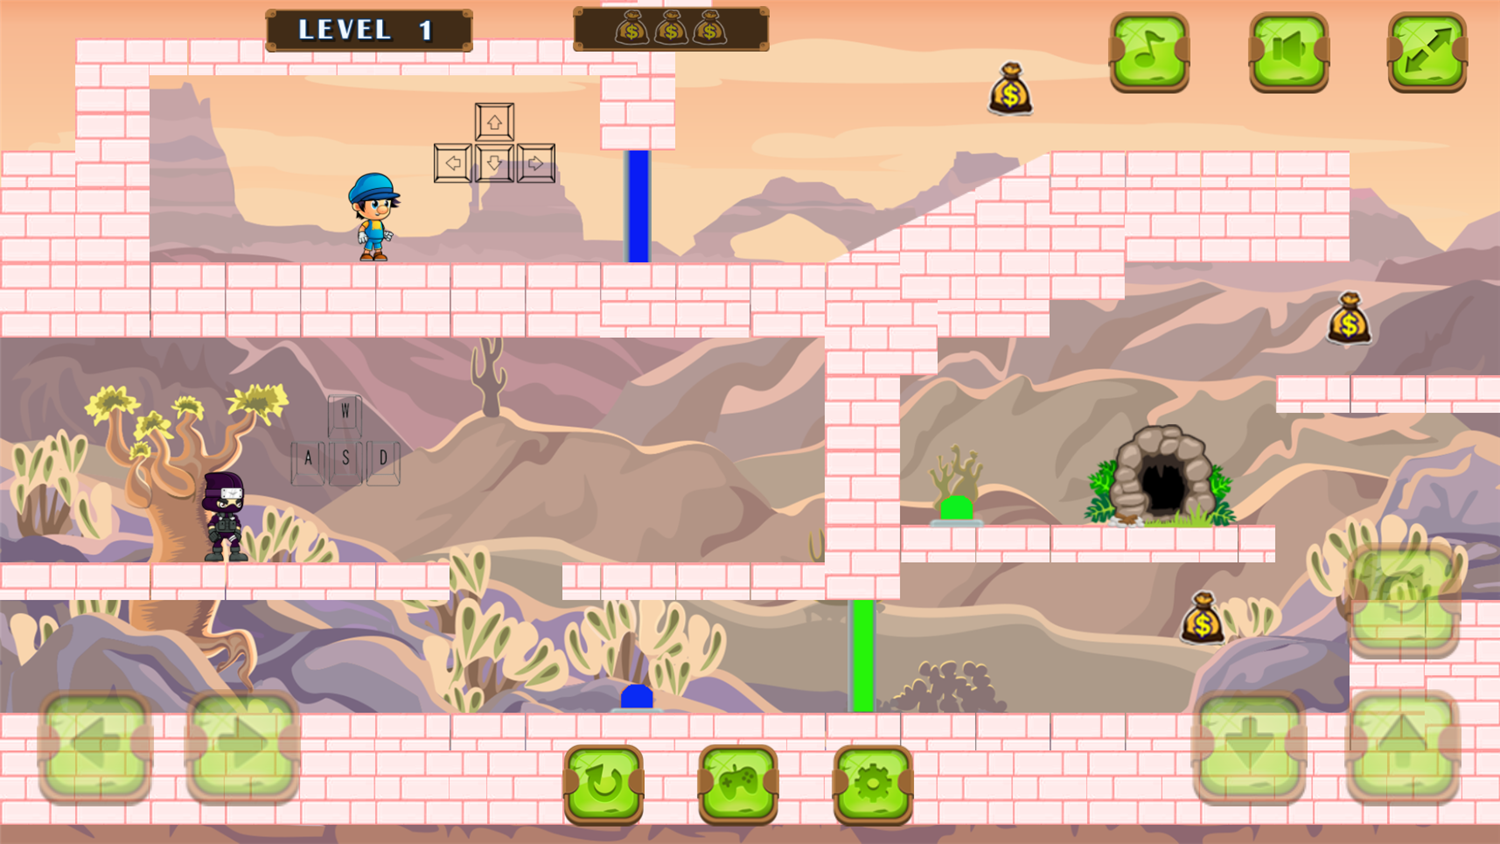 Toto Double Trouble Game Level Start Screenshot.